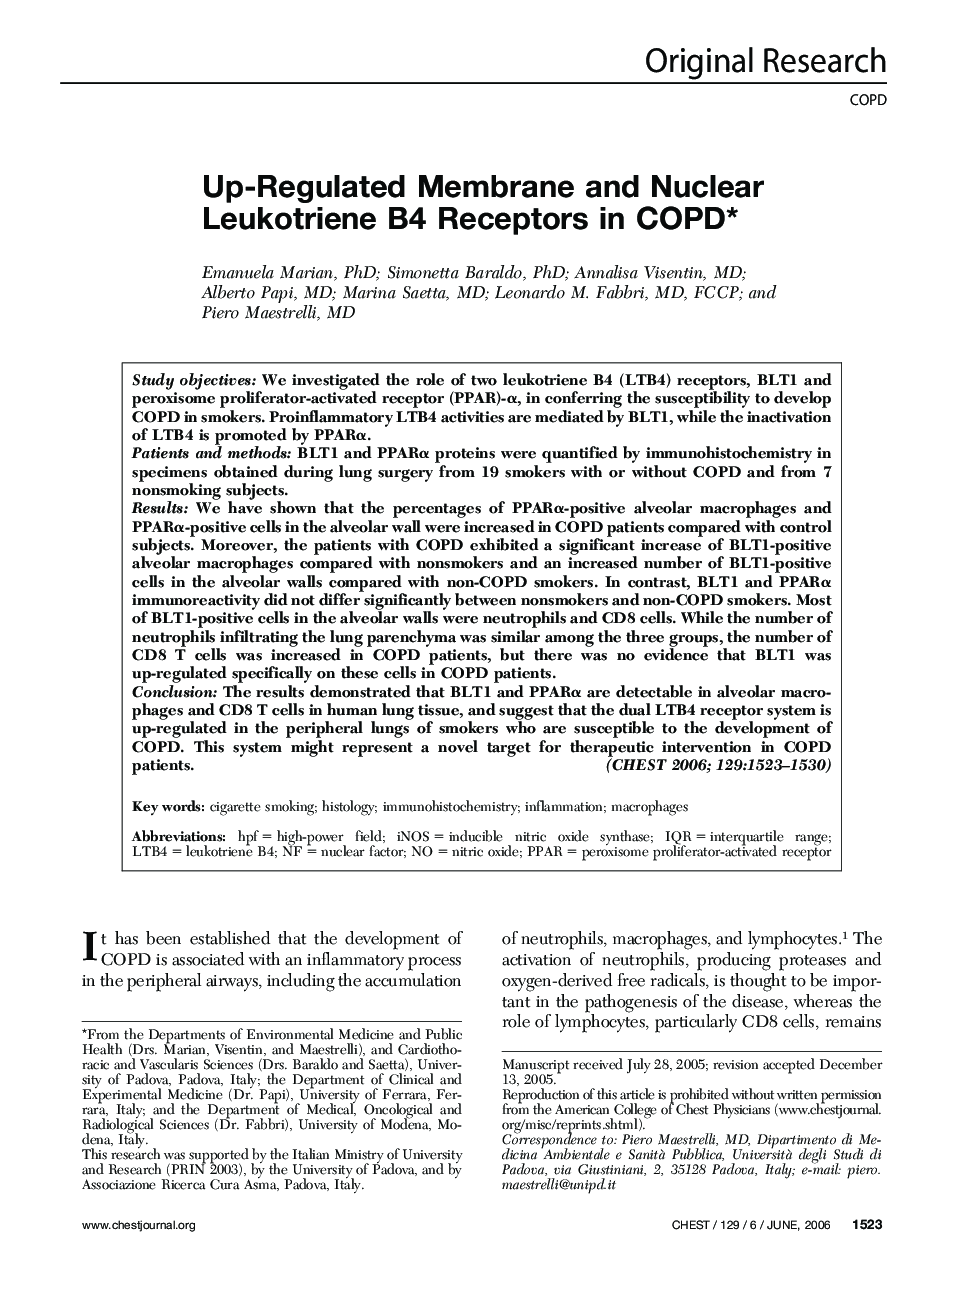 Up-Regulated Membrane and Nuclear Leukotriene B4 Receptors in COPD 